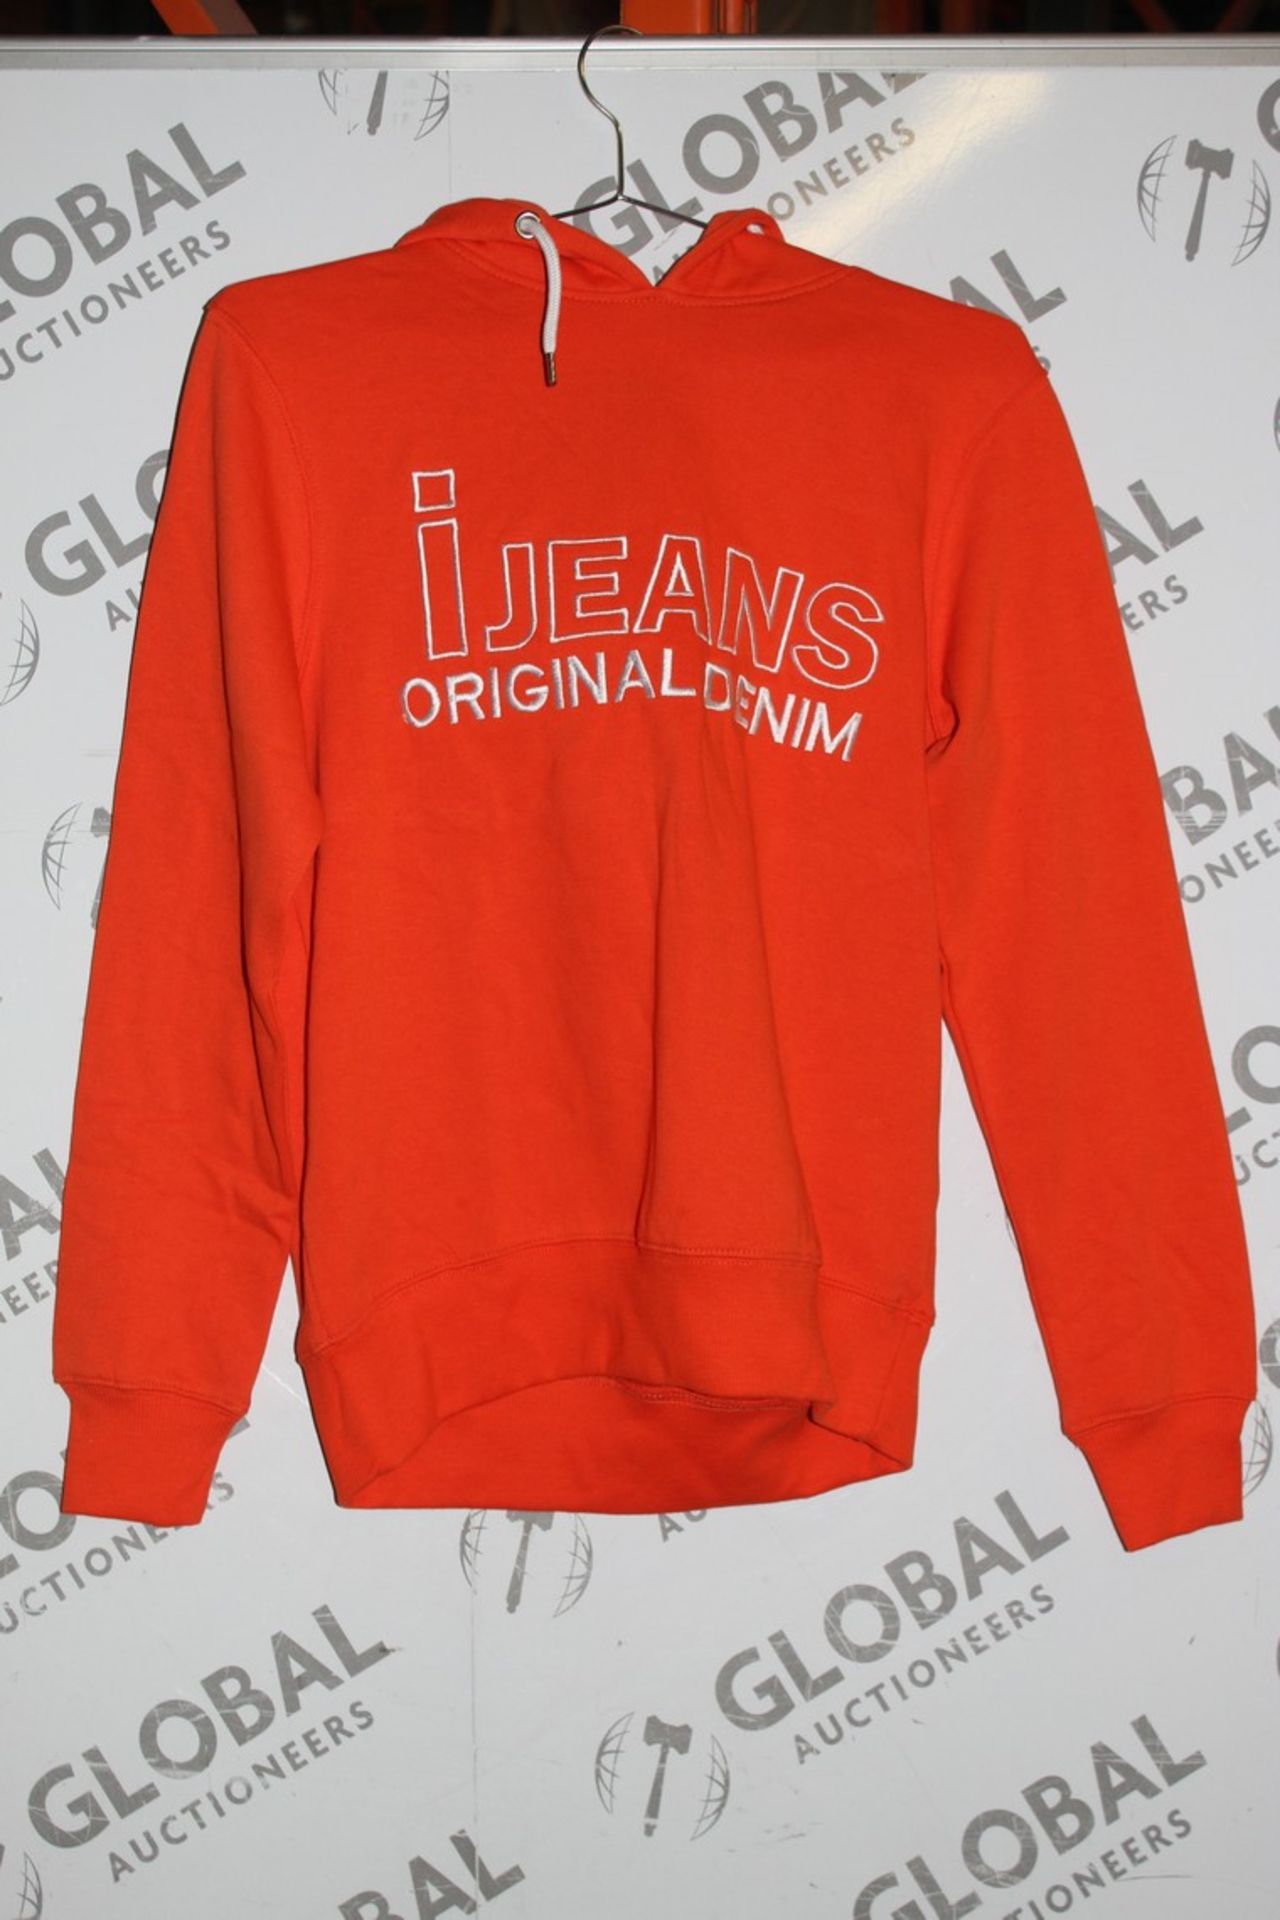 Lot to Contain 22 Brand New Ijeans Original Denim Orange Unisex Hooded Jumpers in Assorted Sizes RRP